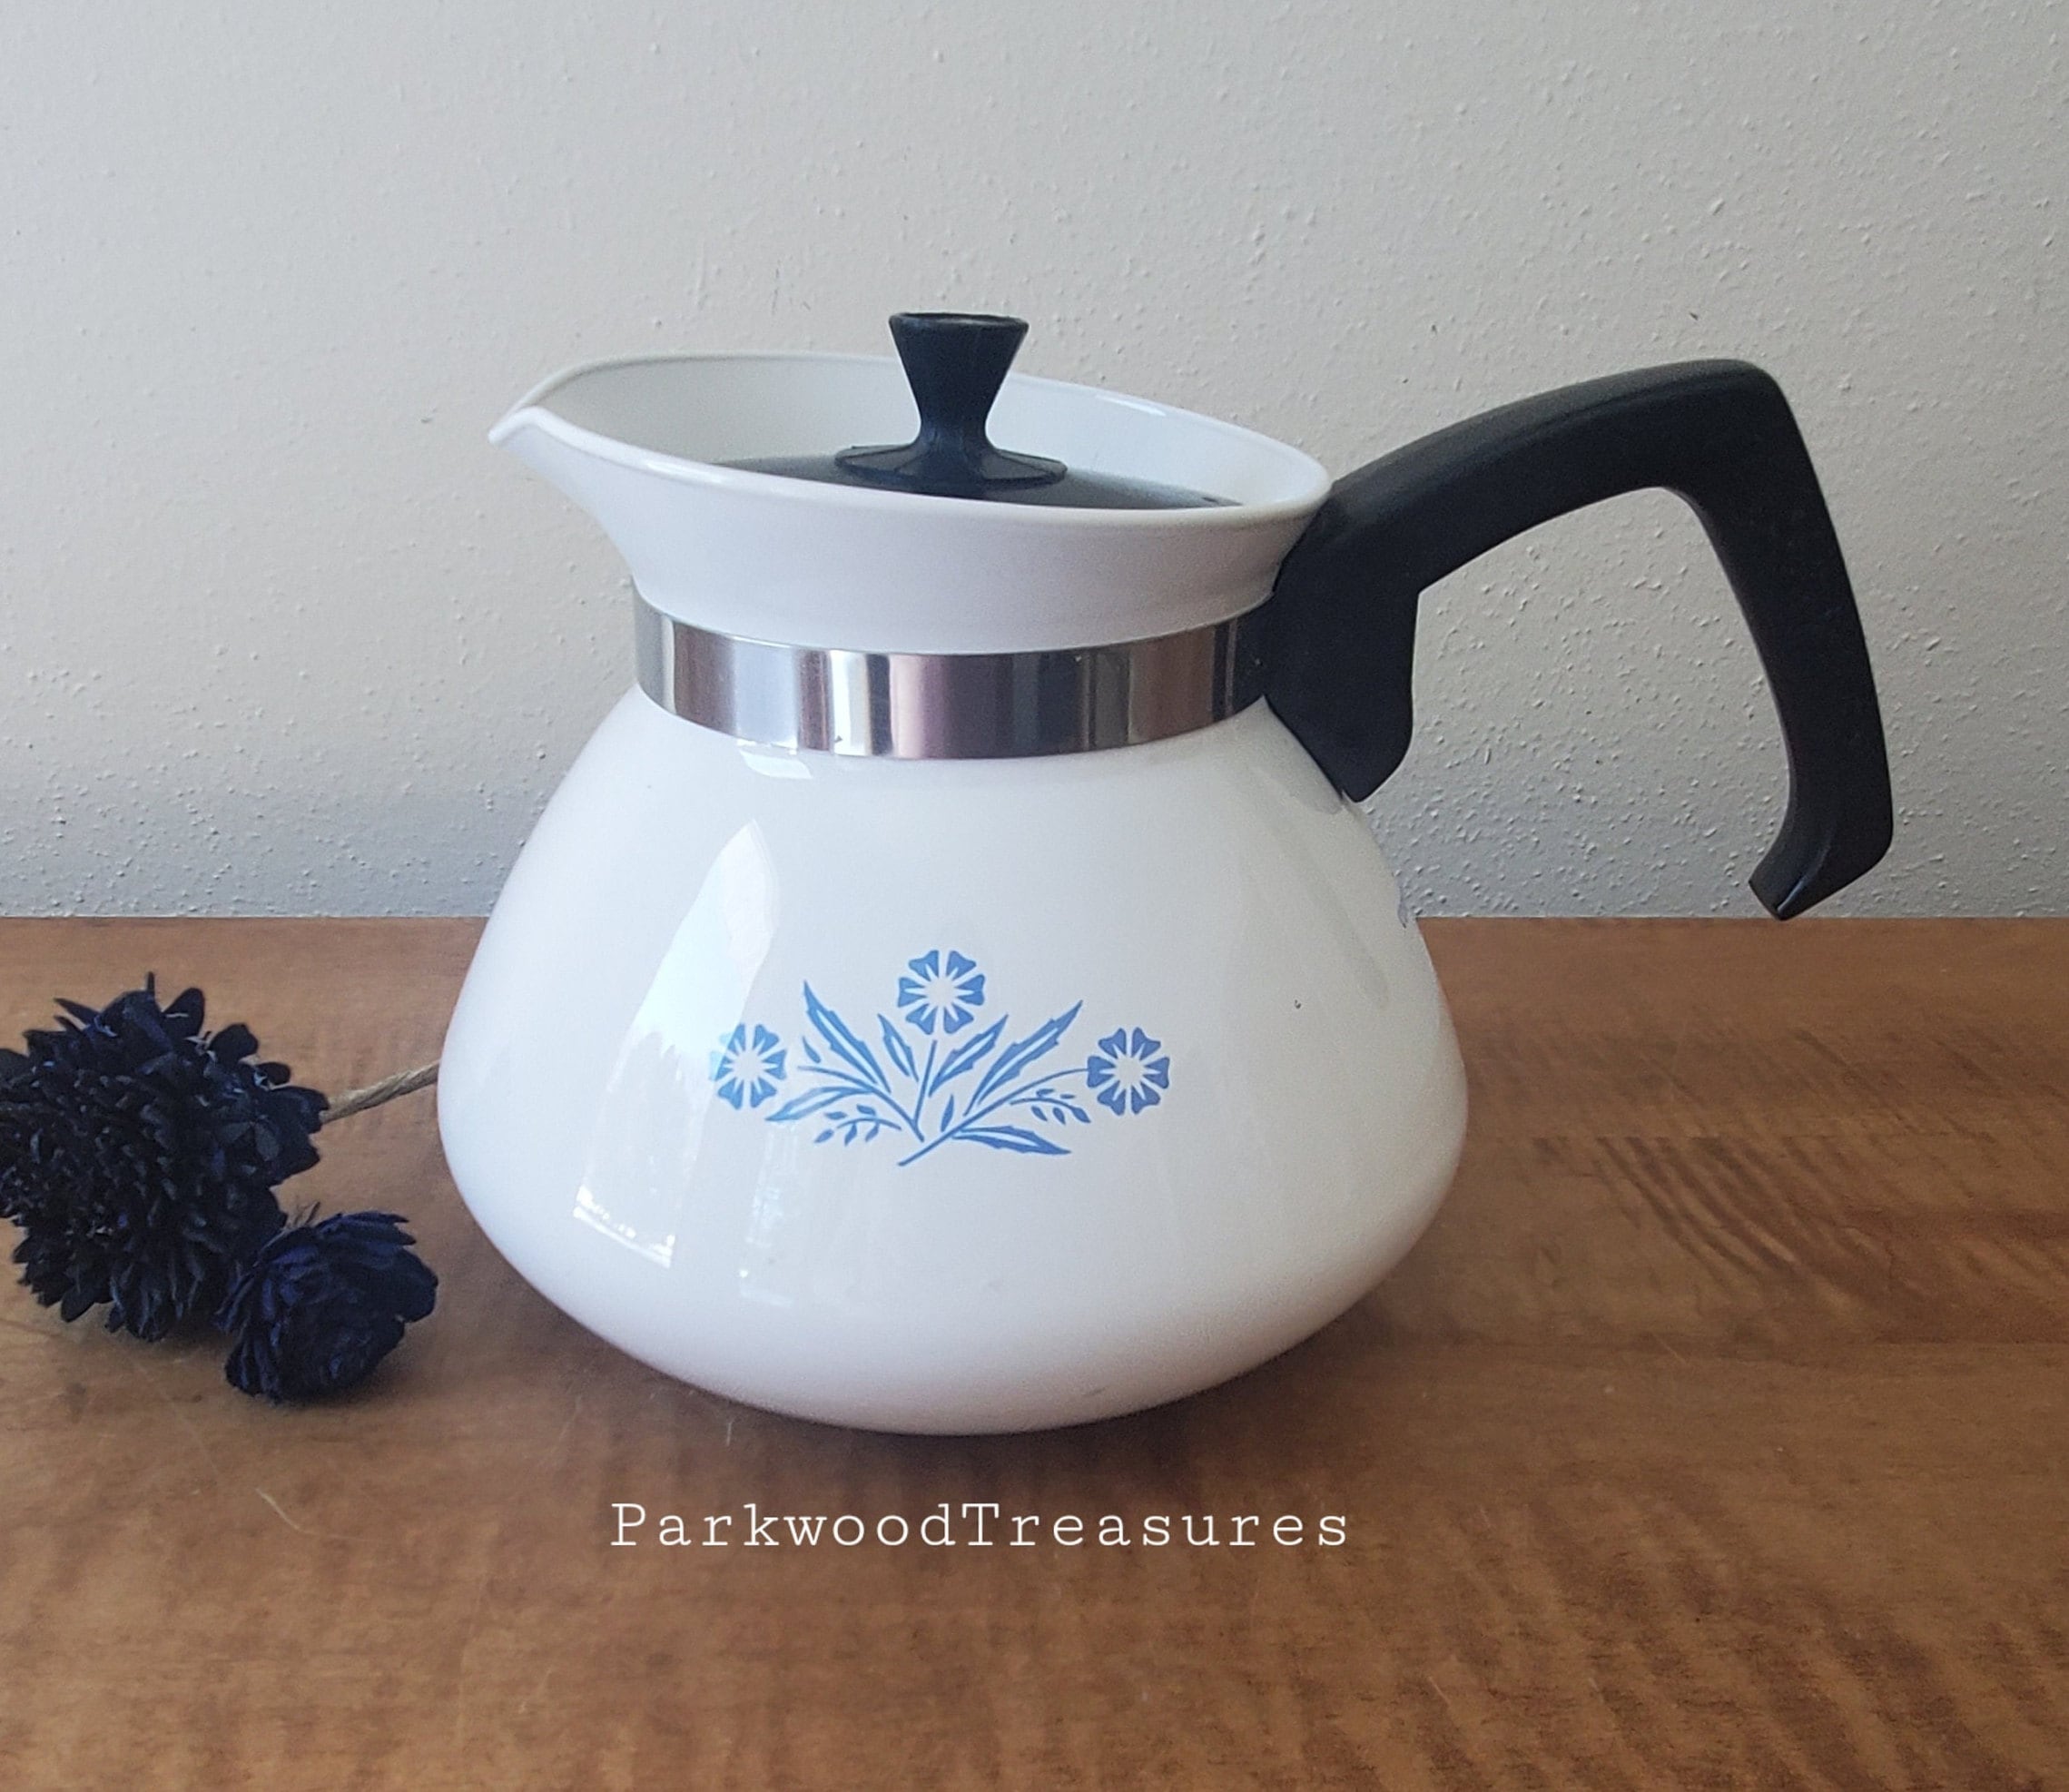 Vintage 1960 Corning Ware Blue Cornflower 6 Cup Coffee Maker Percolator  Glass Knob for Sale in Los Angeles, CA - OfferUp